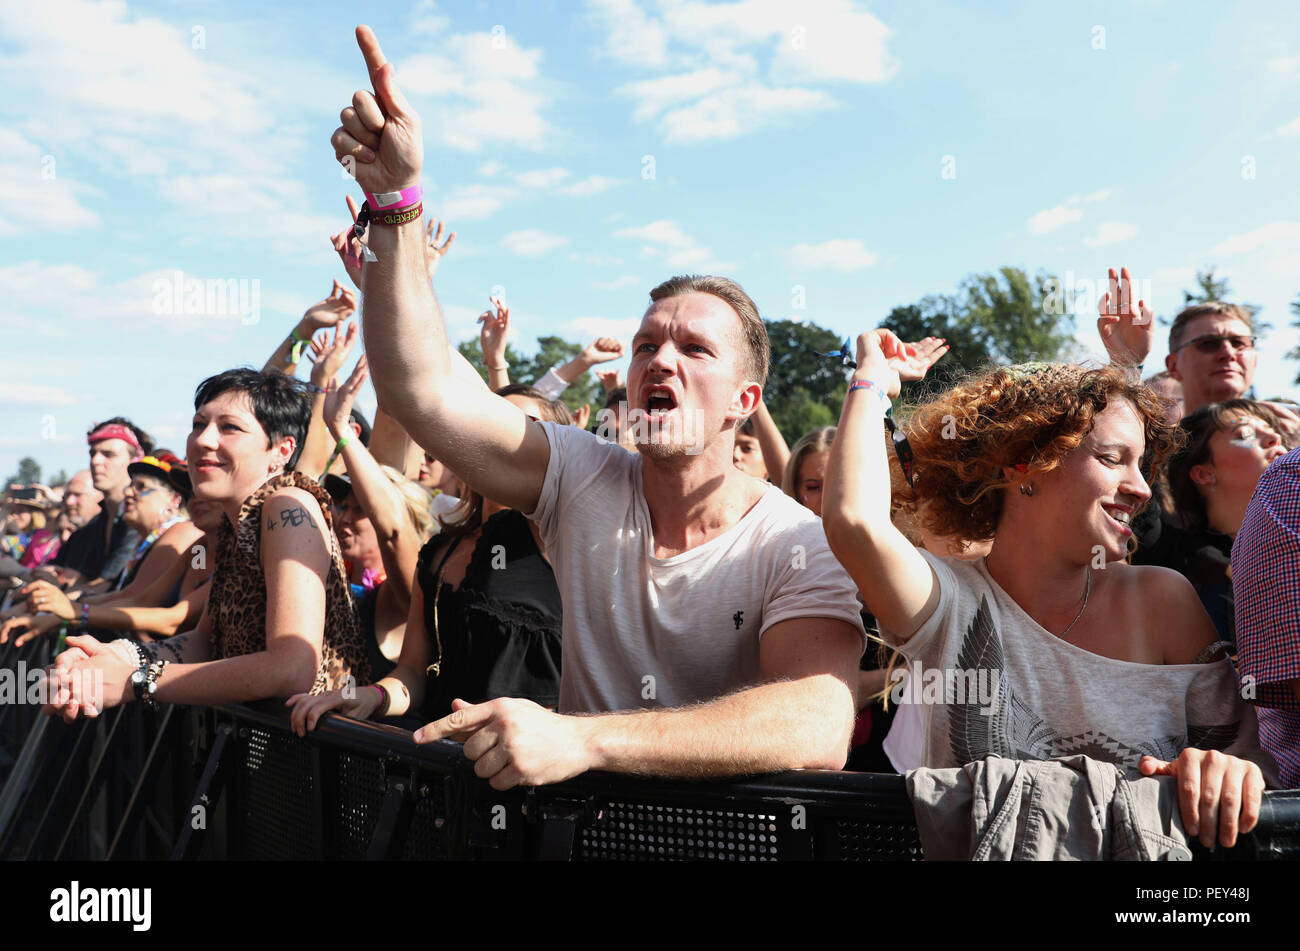 The crowd watching rock band Circa Waves performing on stage at the brand new Rize Festival in Hylands Park, Chelmsford, Essex. Stock Photo